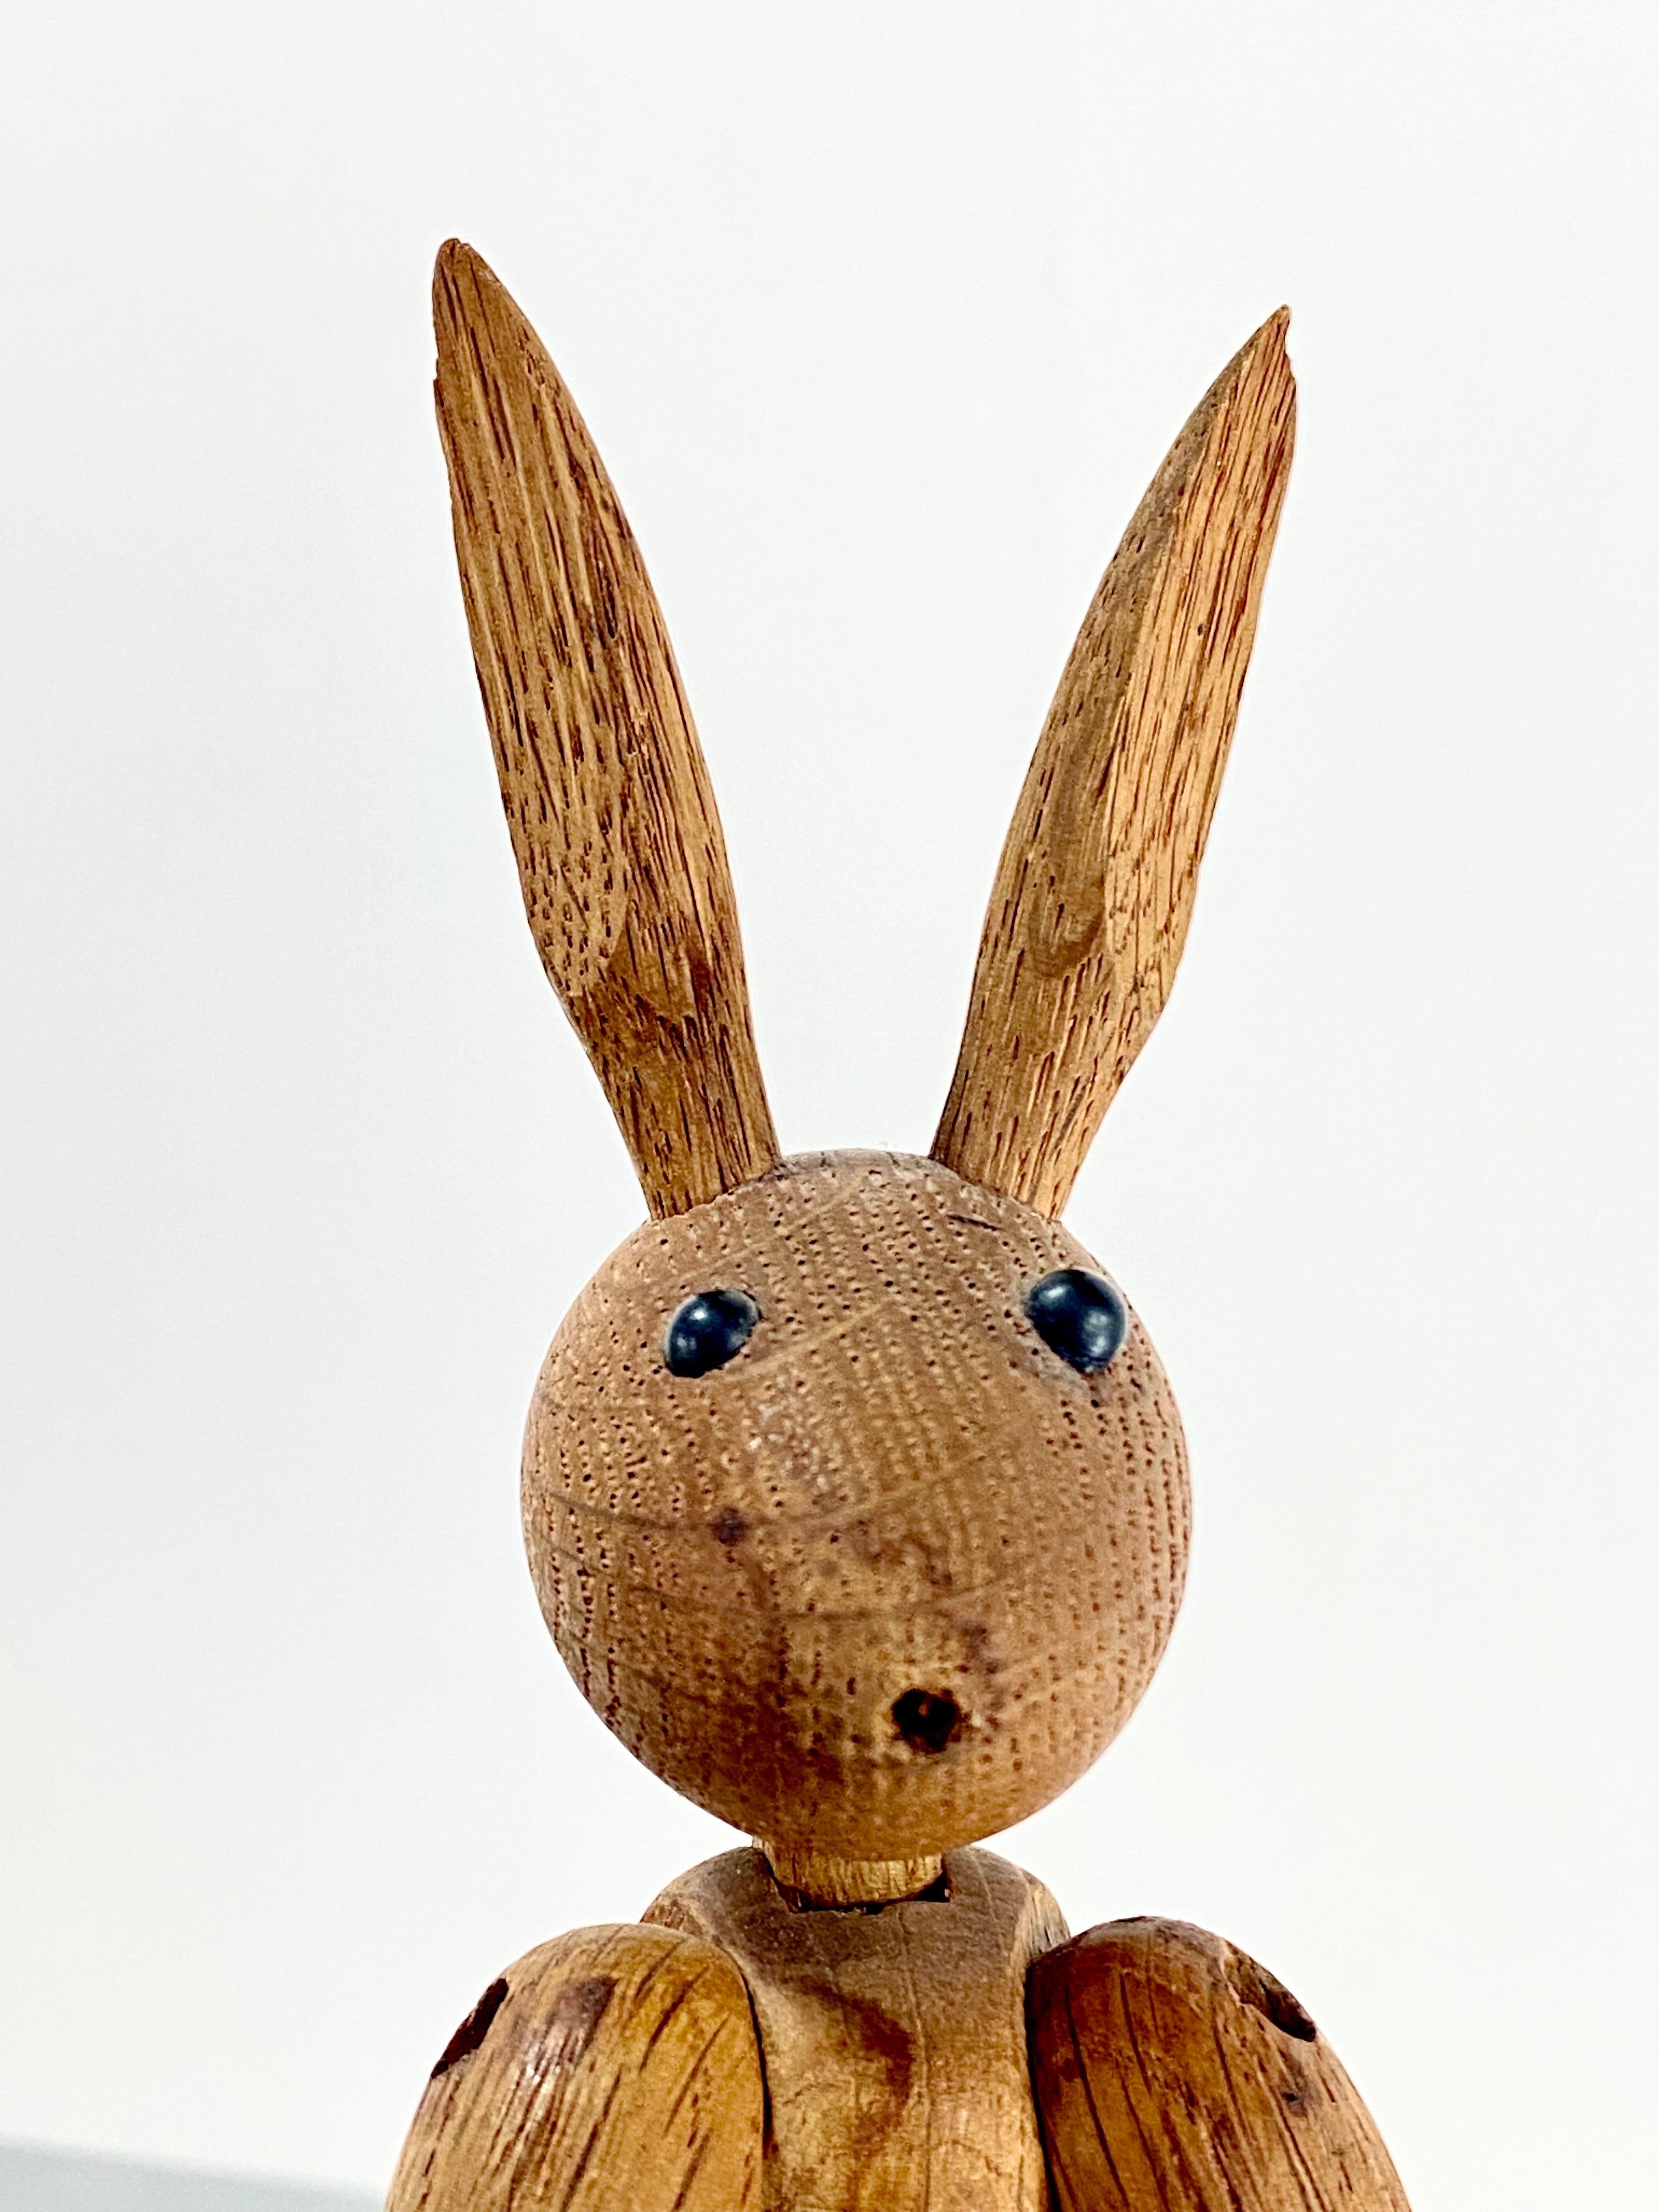 Danish Vintage Rabbit Figurine by Kay Bojesen, It Was Designed in 1957, This is an Exam